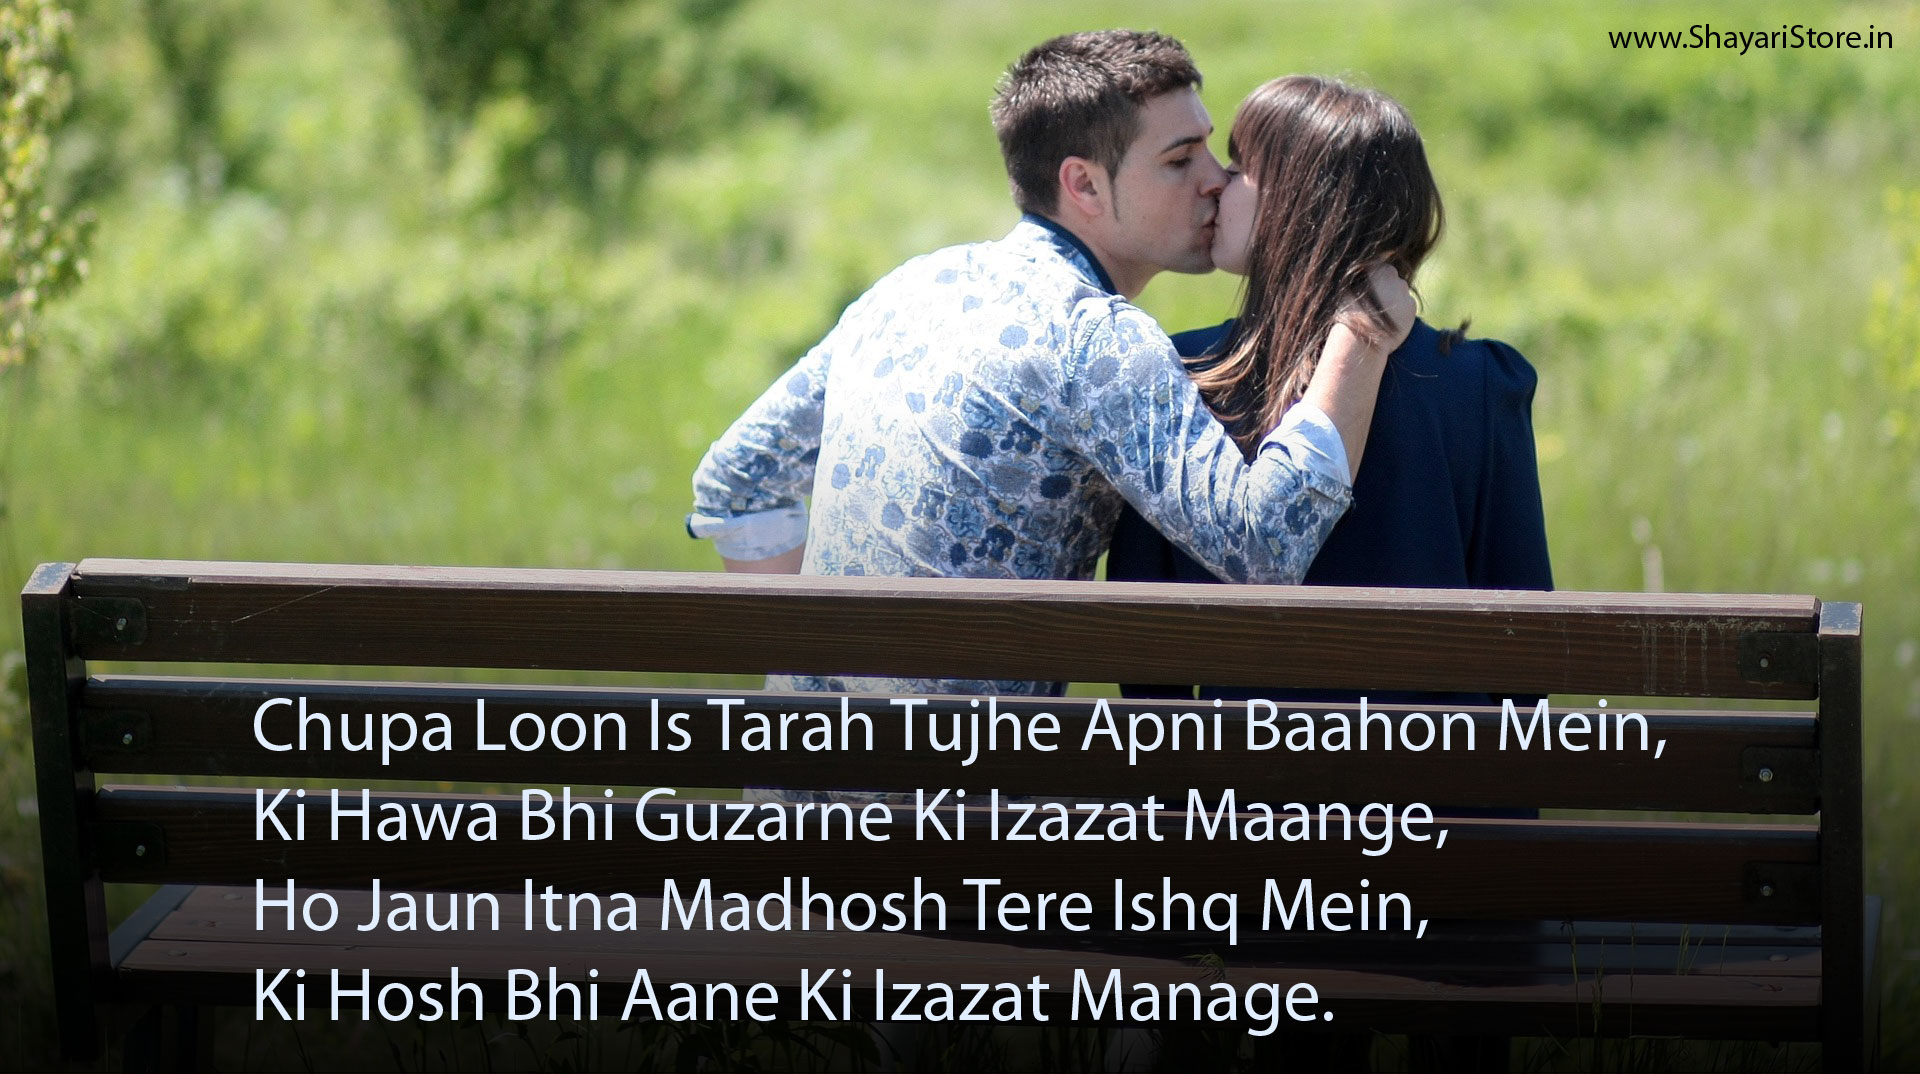 Featured image of post Romantic Couple Images With Hindi Quotes Download / Romantic kiss images romantic couple quotes love shayari romantic love romantic poetry hindi shayari love romantic couples hd images of love couple with quotes 2017,romantic kiss images hd 2017,love couple wallpaper hd 1080p free download 2017,cute couple images for dp.